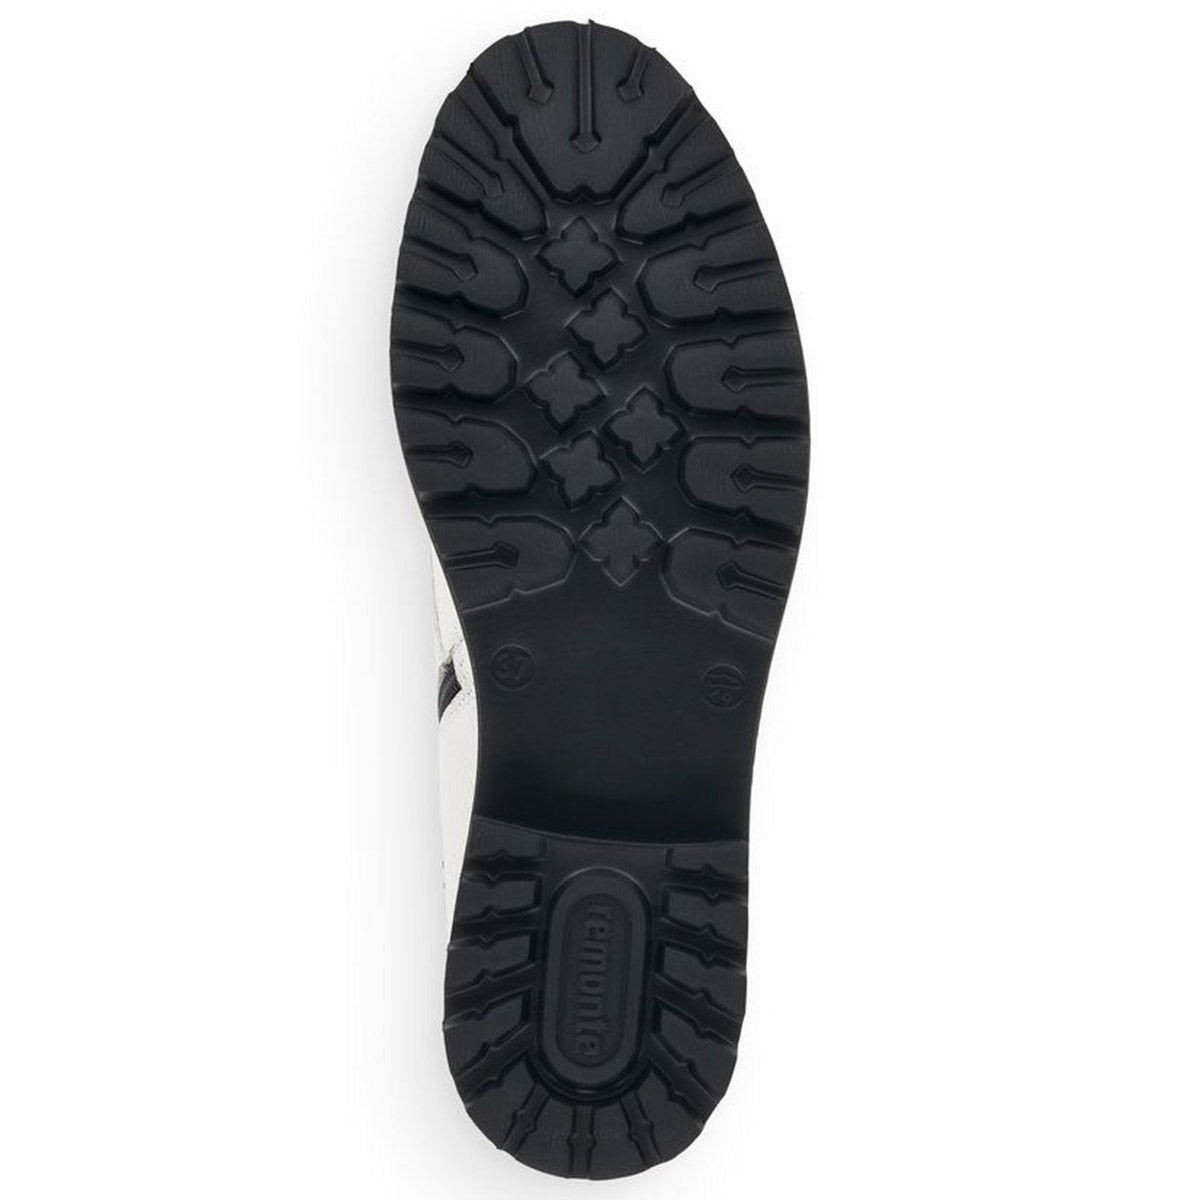 Black Remonte D8671 boot sole with tread pattern.